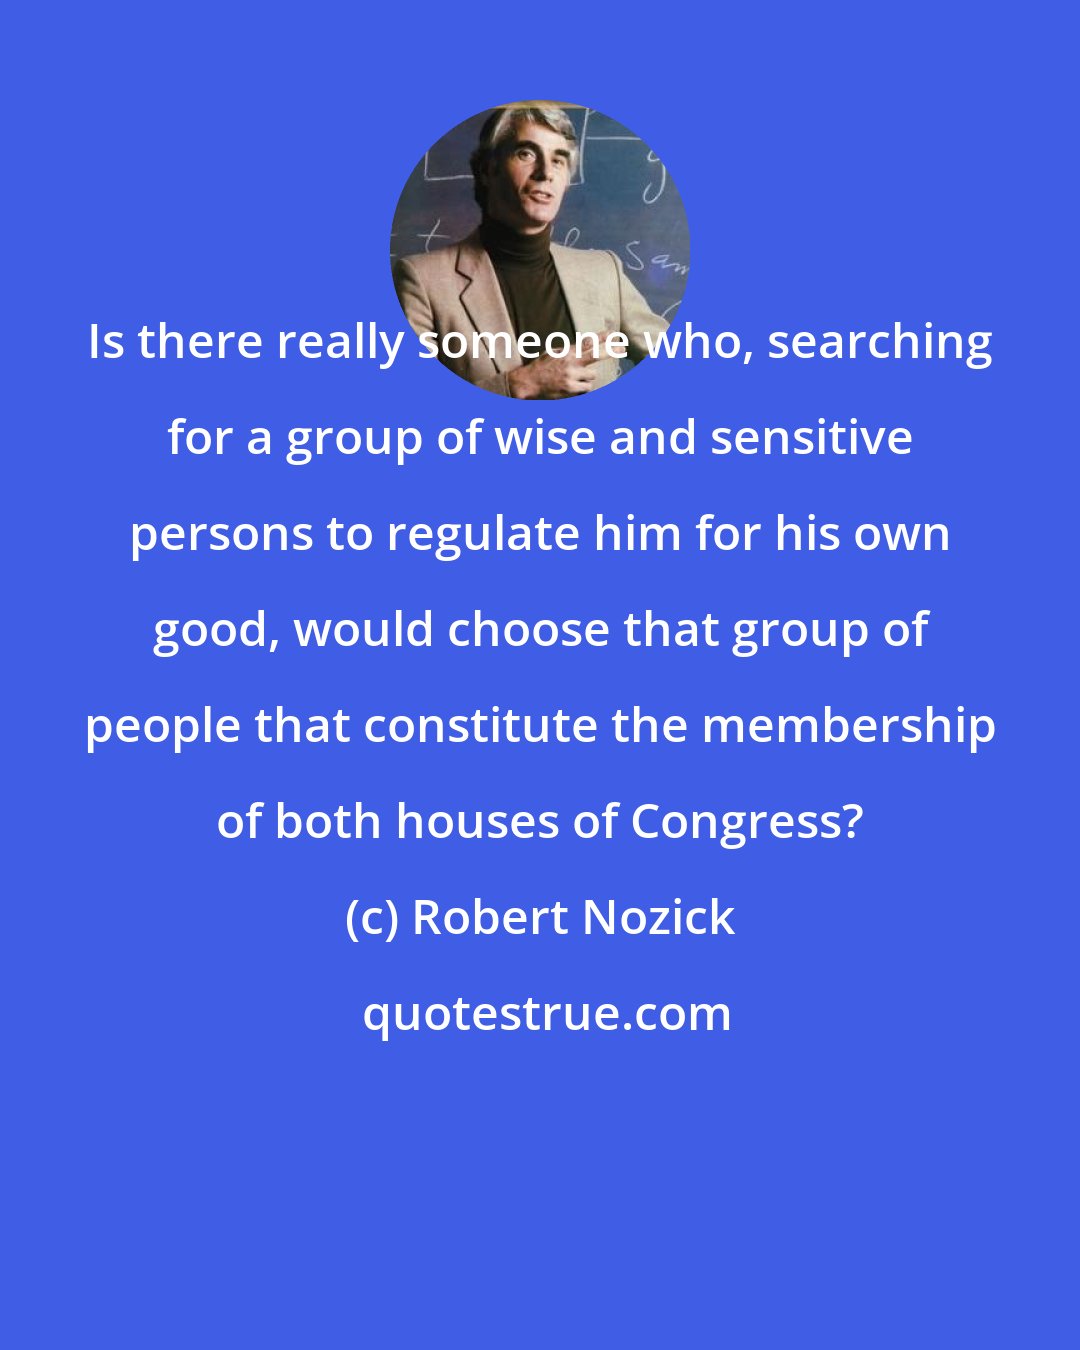 Robert Nozick: Is there really someone who, searching for a group of wise and sensitive persons to regulate him for his own good, would choose that group of people that constitute the membership of both houses of Congress?